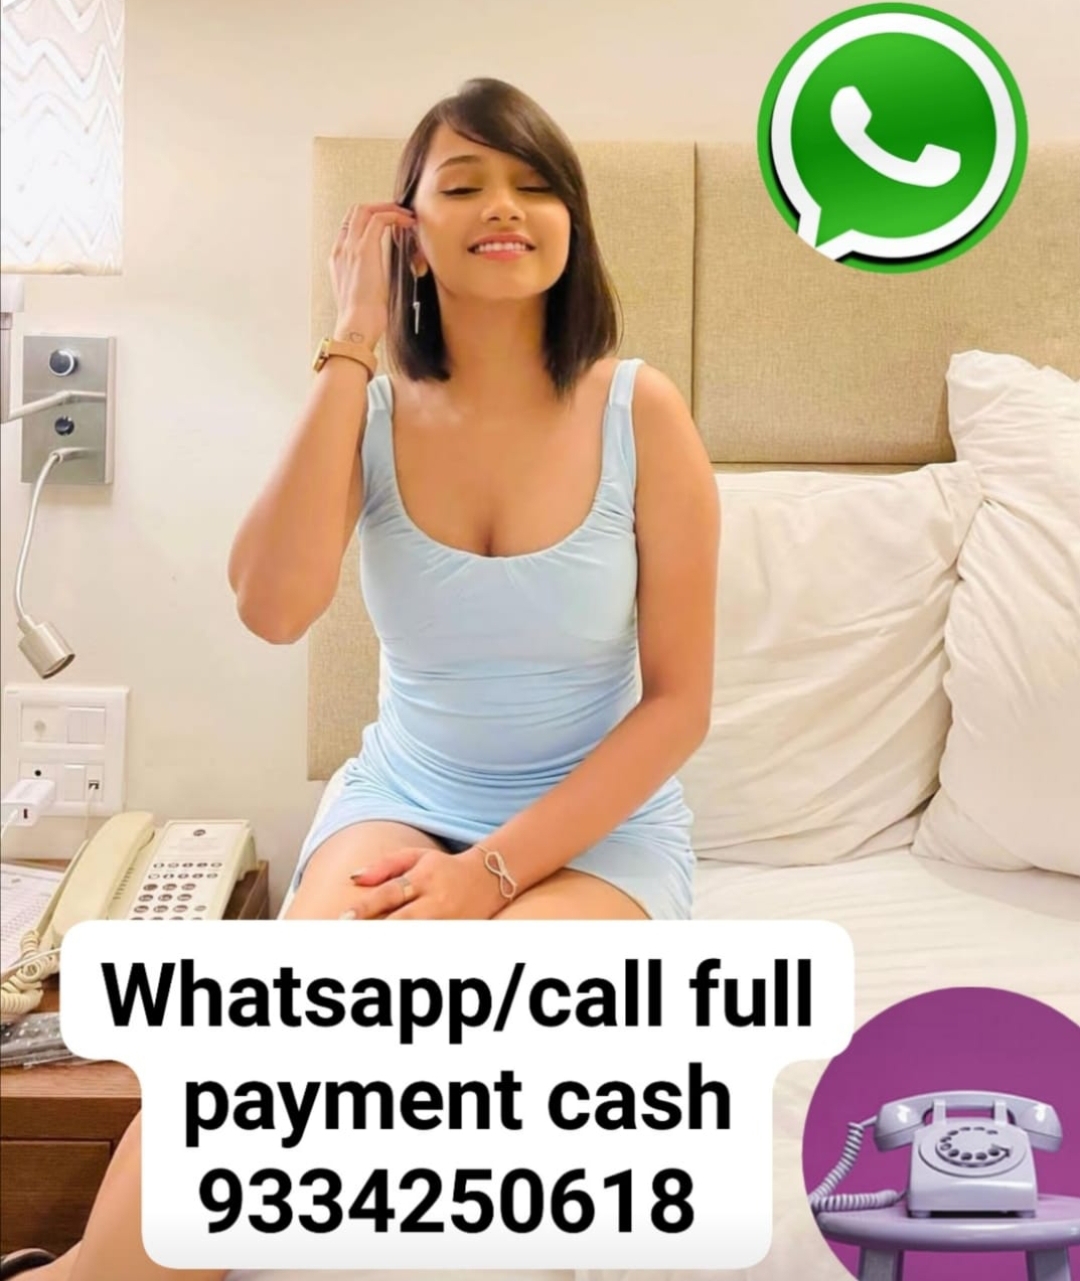 PAlAPUR NO ADVANCE✅💵 PAYMENT DIRECT HAND TO HAND FULL PAYMENT CAS